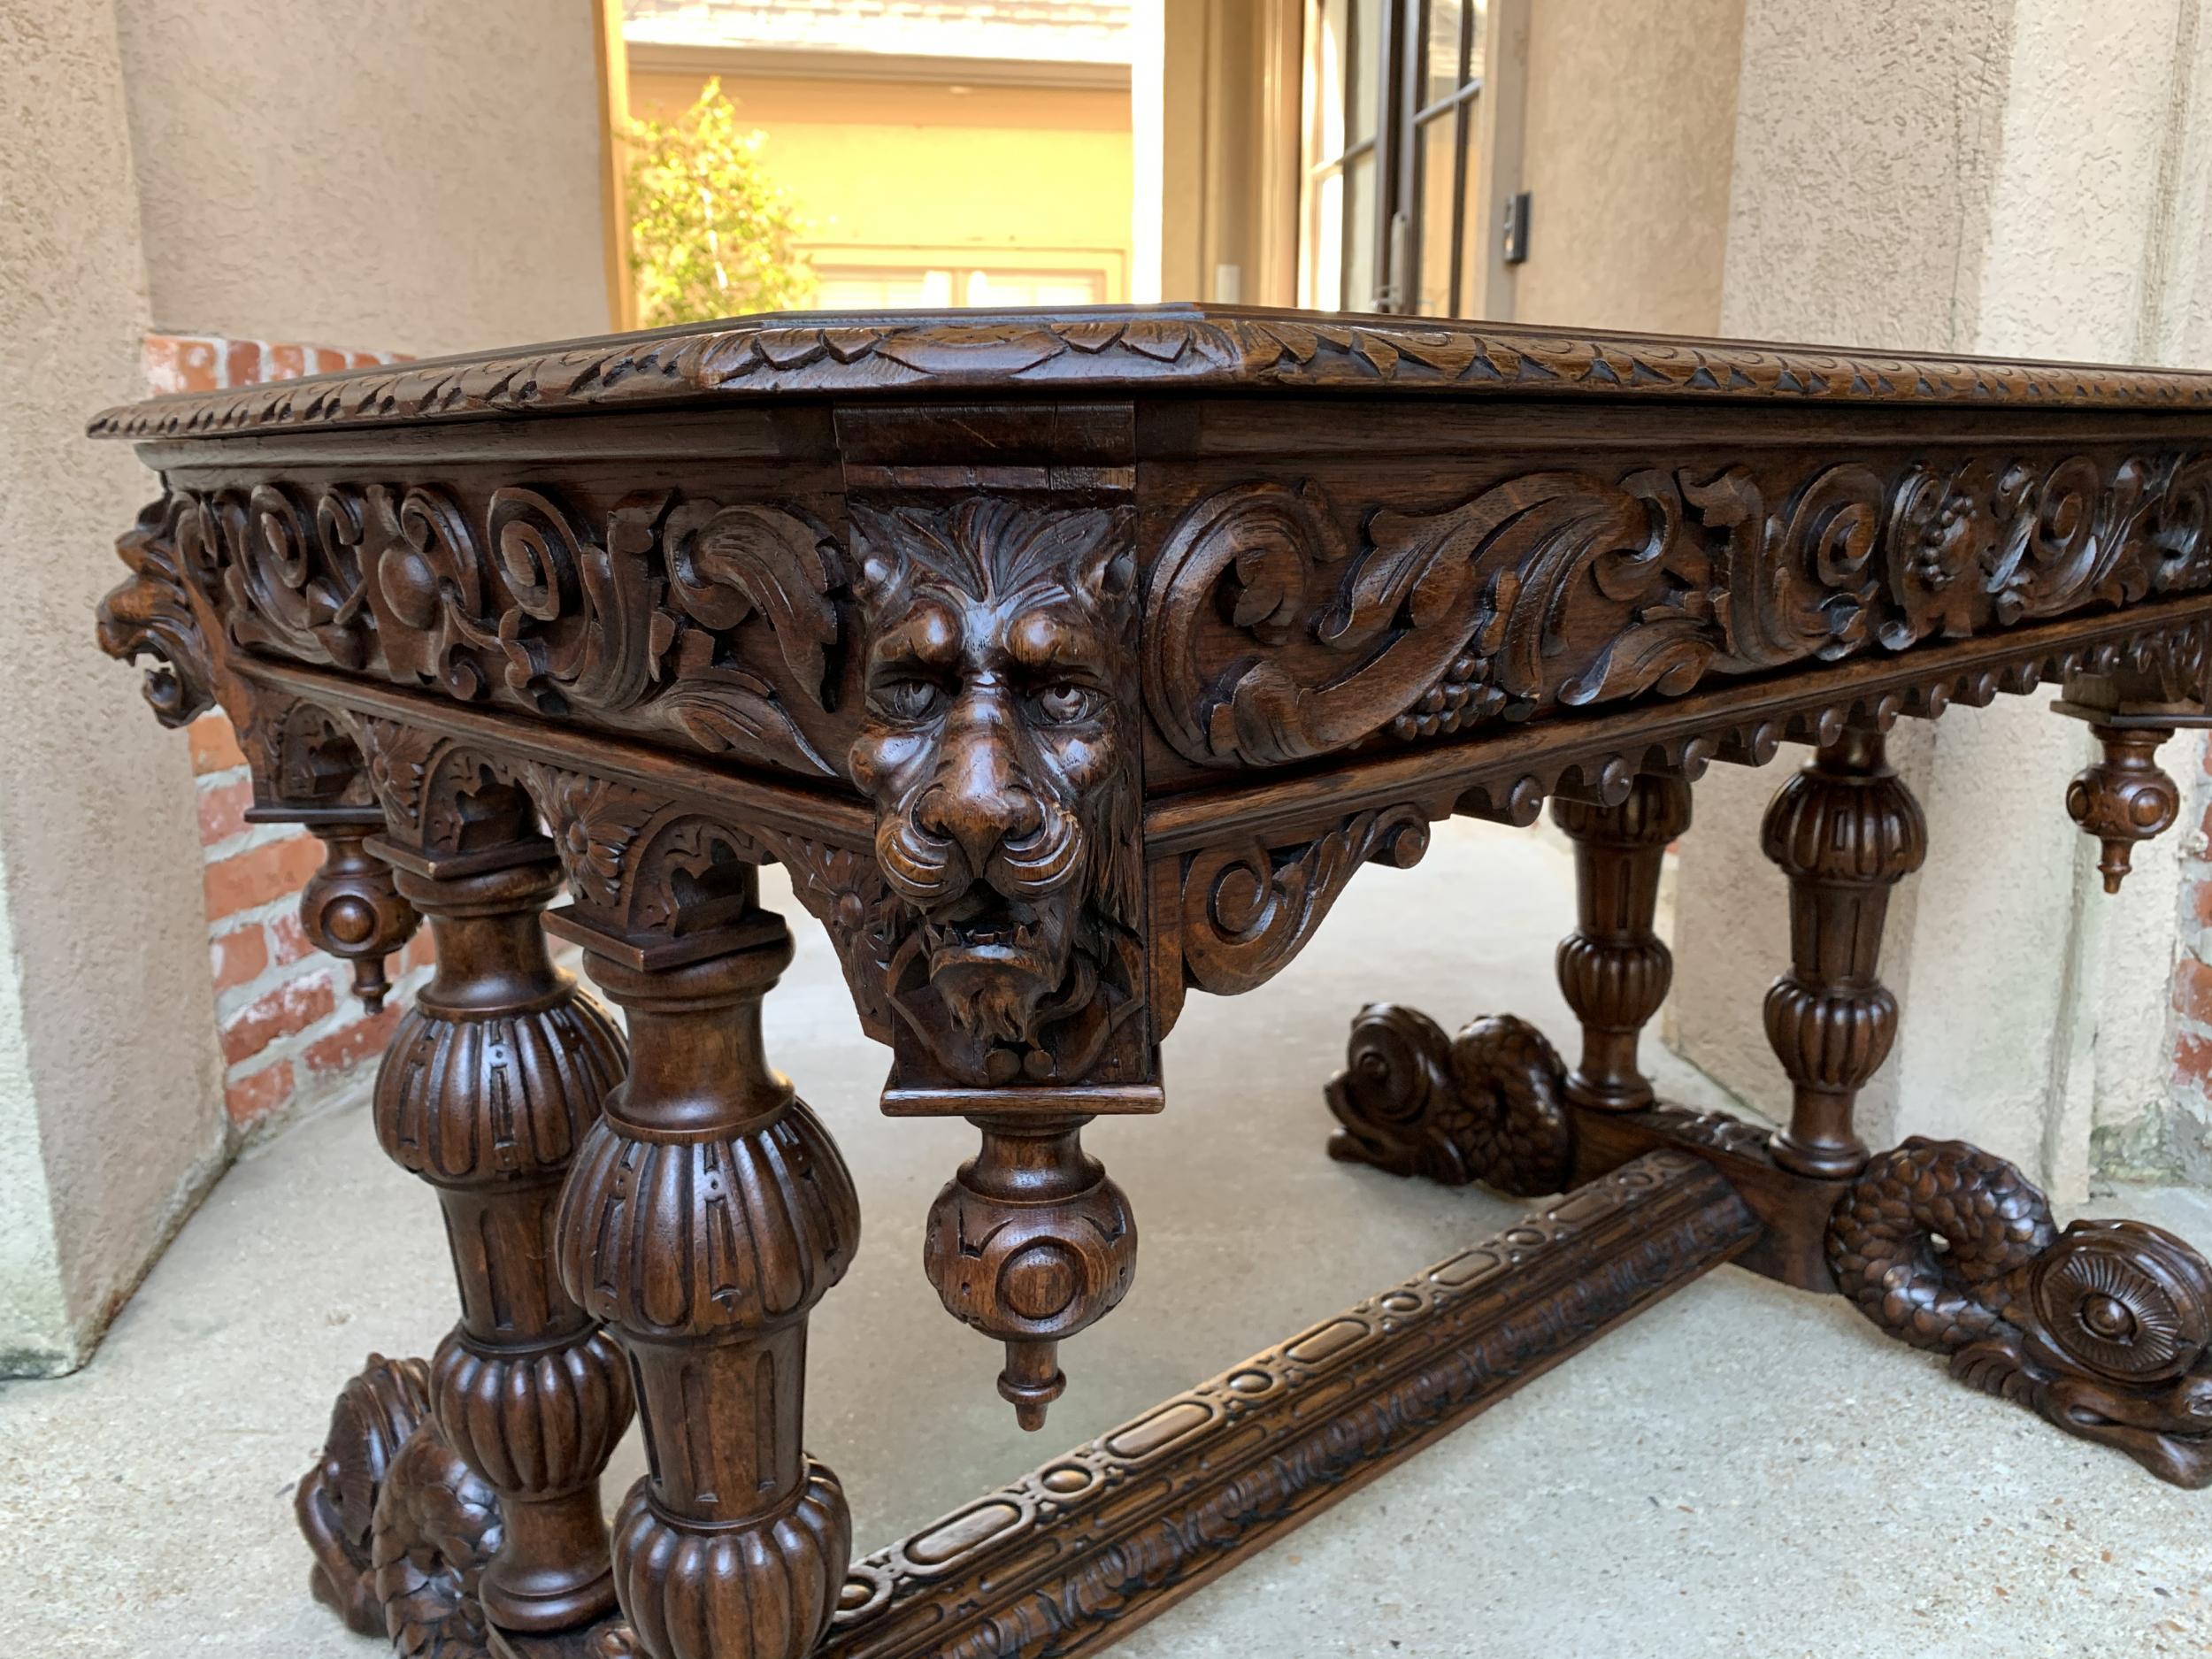 19th century French Carved Oak Desk Sofa Side Table Dolphin Renaissance Gothic 4